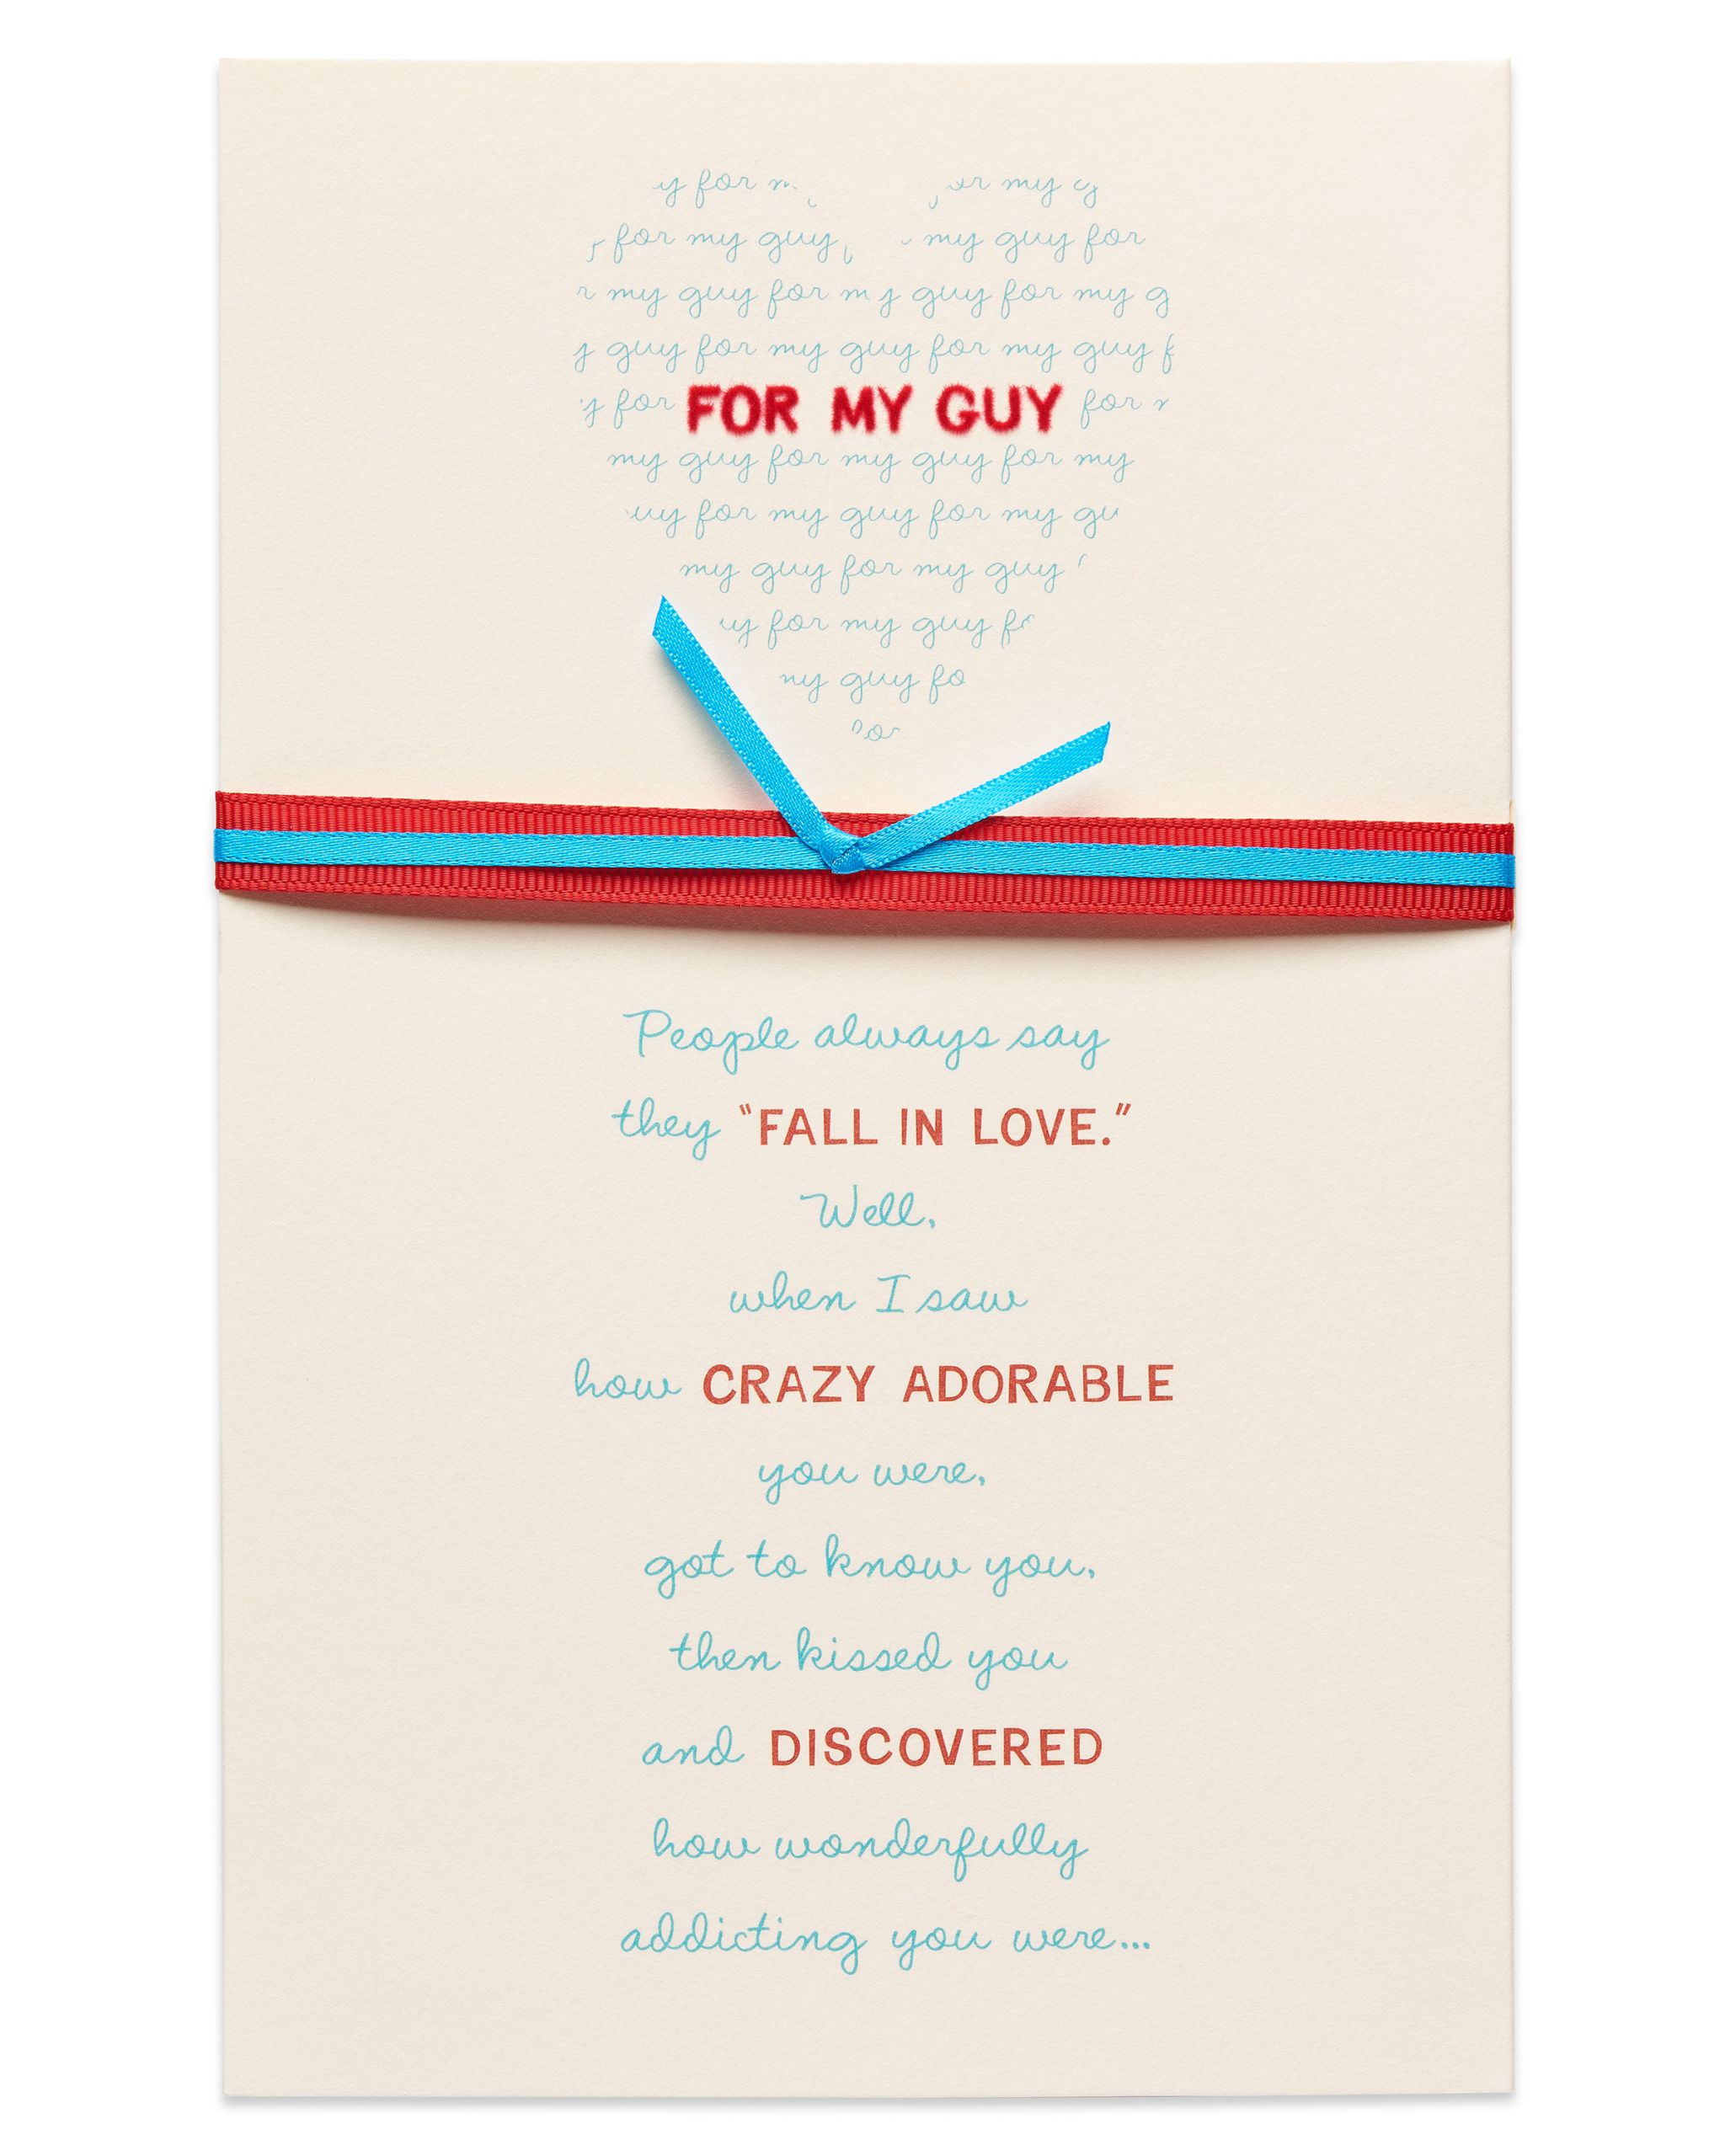 Romantic Birthday Cards For Him
 American Greetings My Guy Romantic Birthday Card for Him